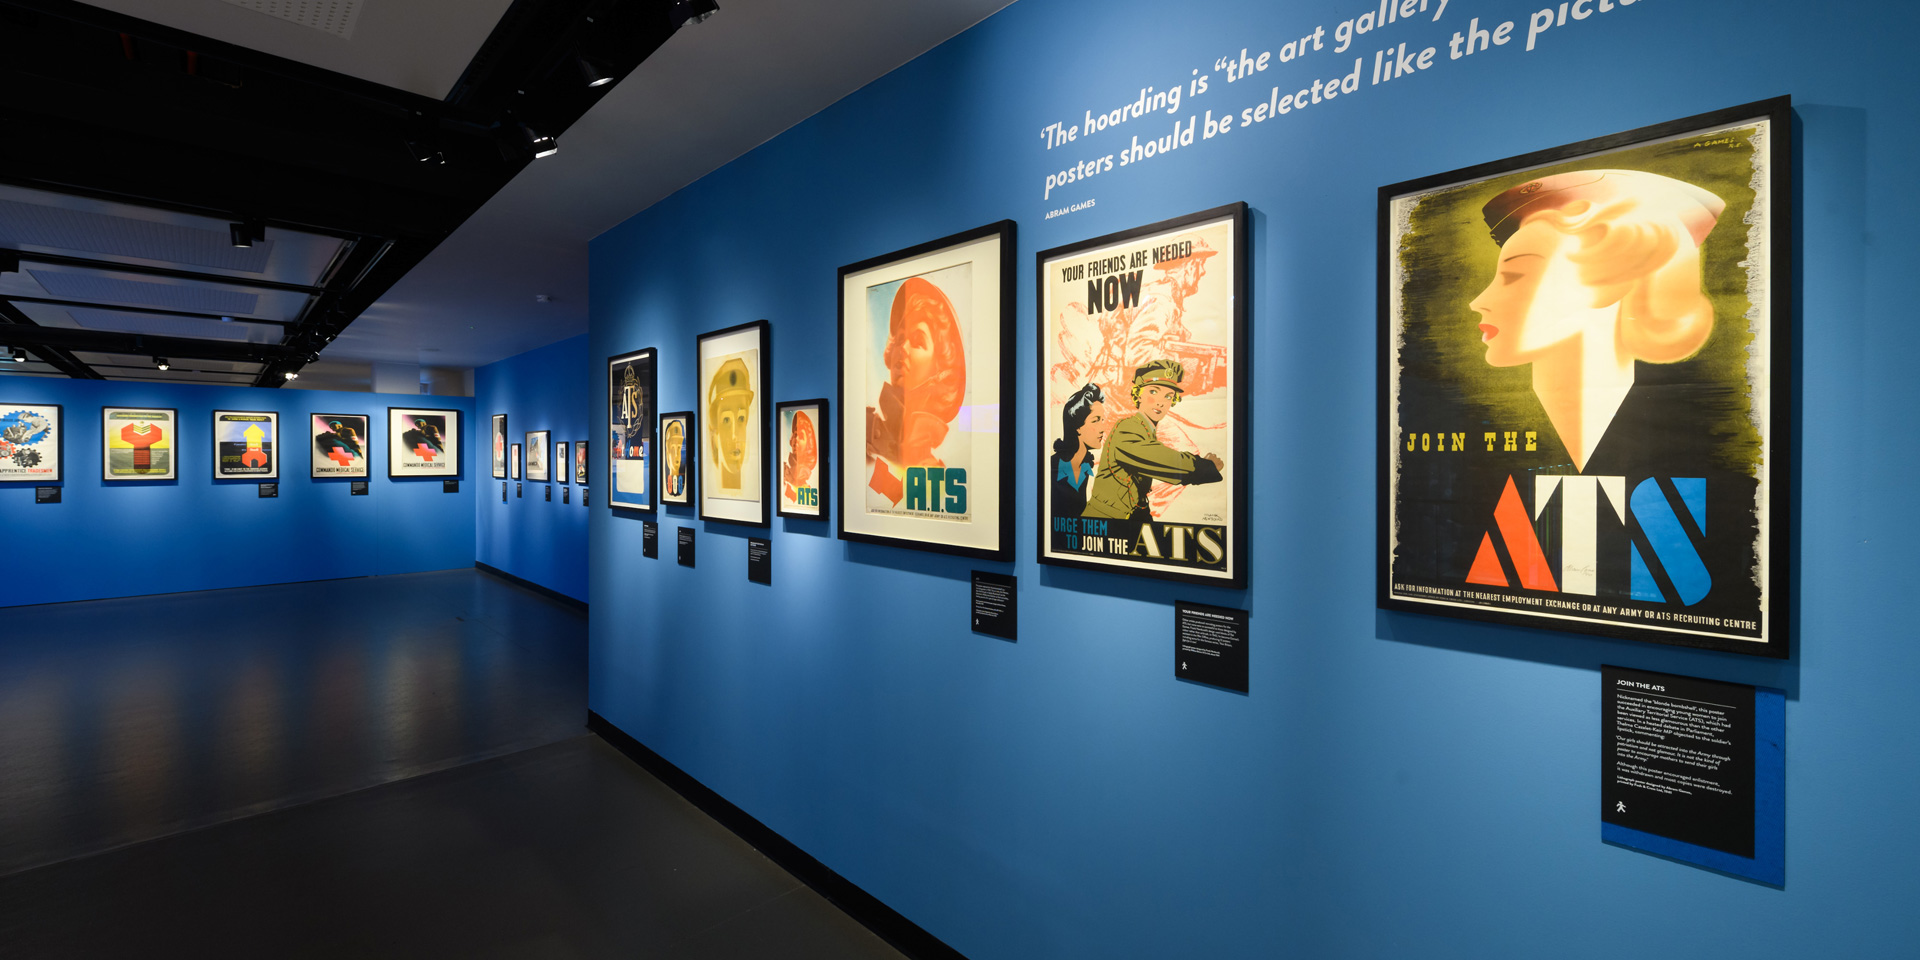 Recruiting posters by Abram Games on display in the 'Art of Persuasion' exhibition